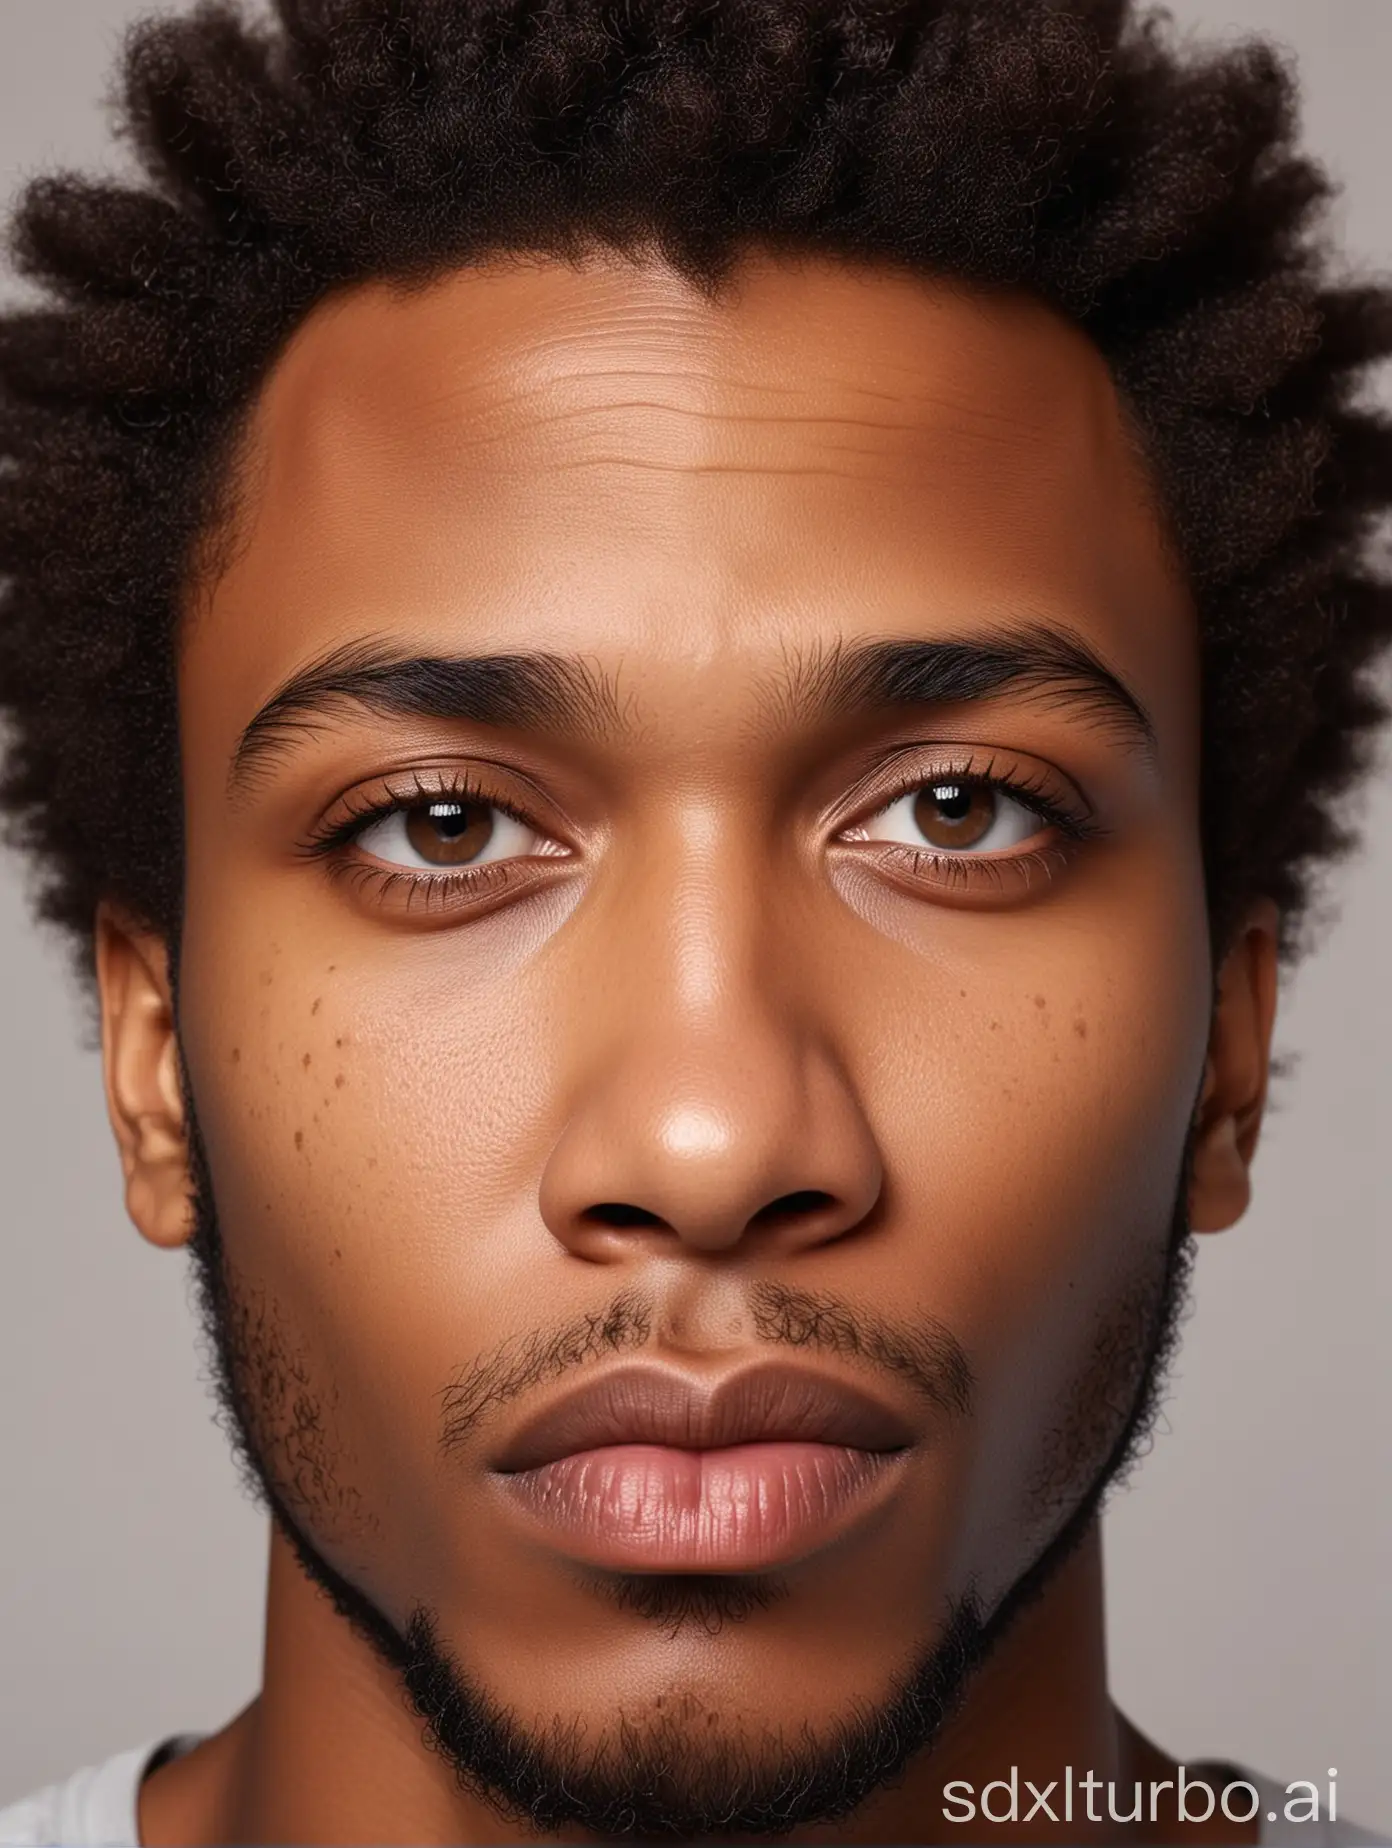 A close up, zoom in, more intimate photobooth studio-style portrait of a afro male model. This image focuses even more on his face, showcasing his naturally attractive features with a strong facial structure. His expression is engaging and charismatic, and direct eye contact with the camera, emphasizing his light brown eyes. The model has a completely shaved face, enhancing his sophisticated and attractive look. The studio lighting softly illuminates his features, creating a warm, welcoming feel. The background remains simple, and white, detailed_skin,